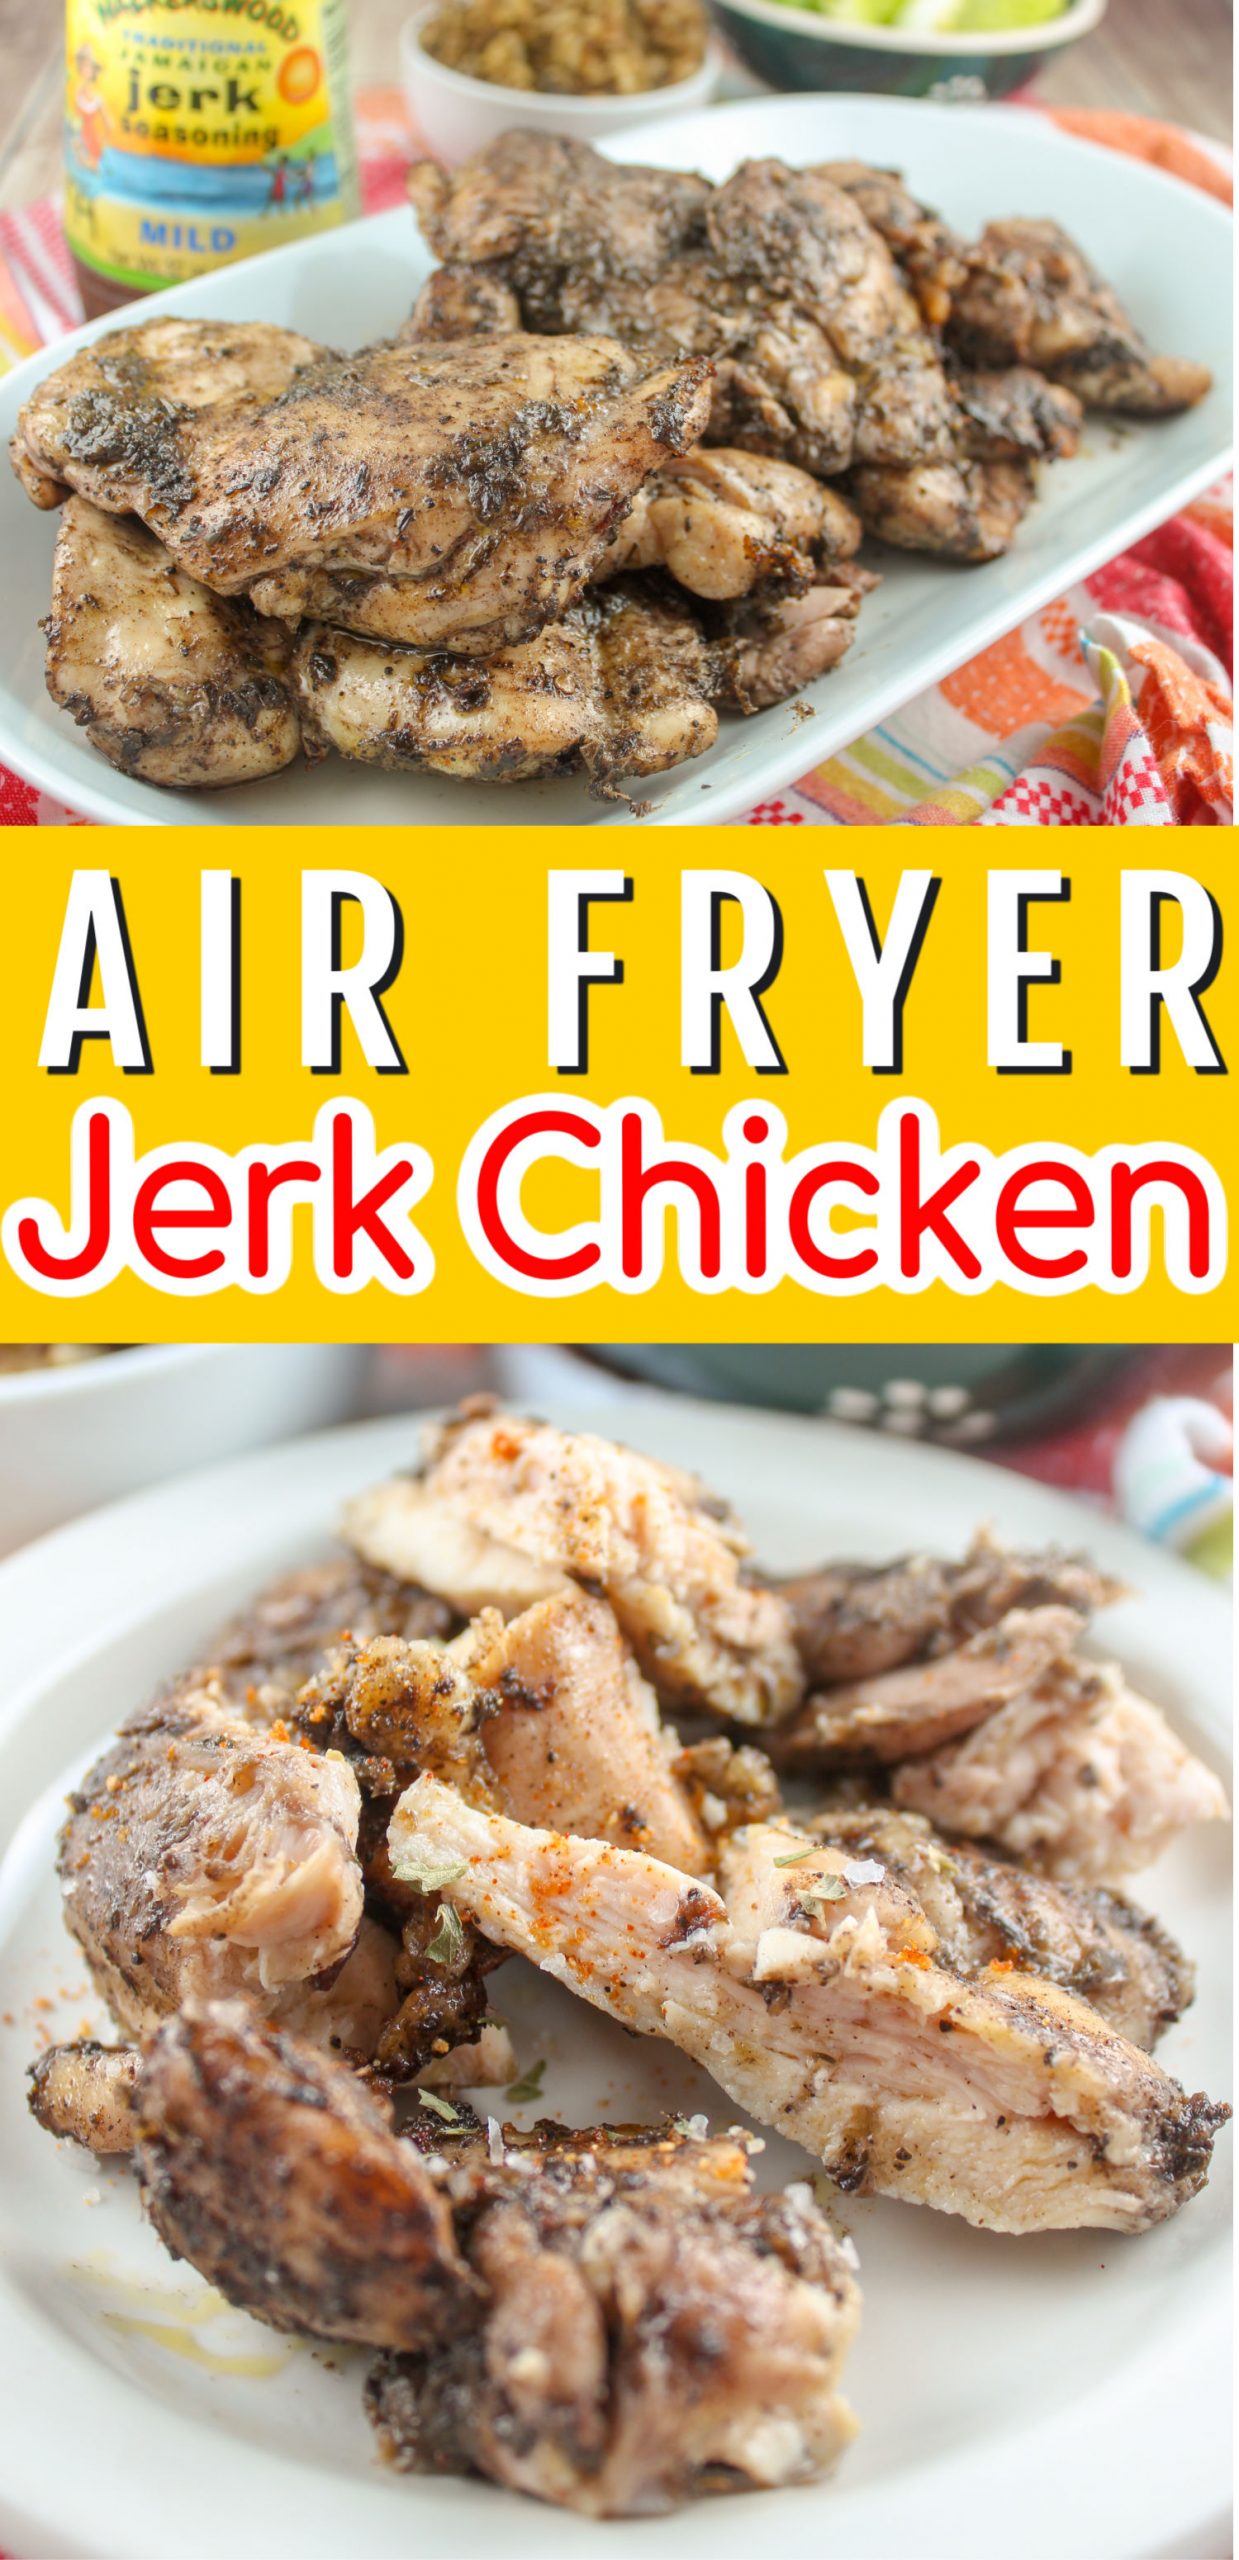 After visiting the Caribbean, I fell in love with Jerk Chicken! This spicy, juicy burst of flavor was sooo good - I had to make it myself!  via @foodhussy